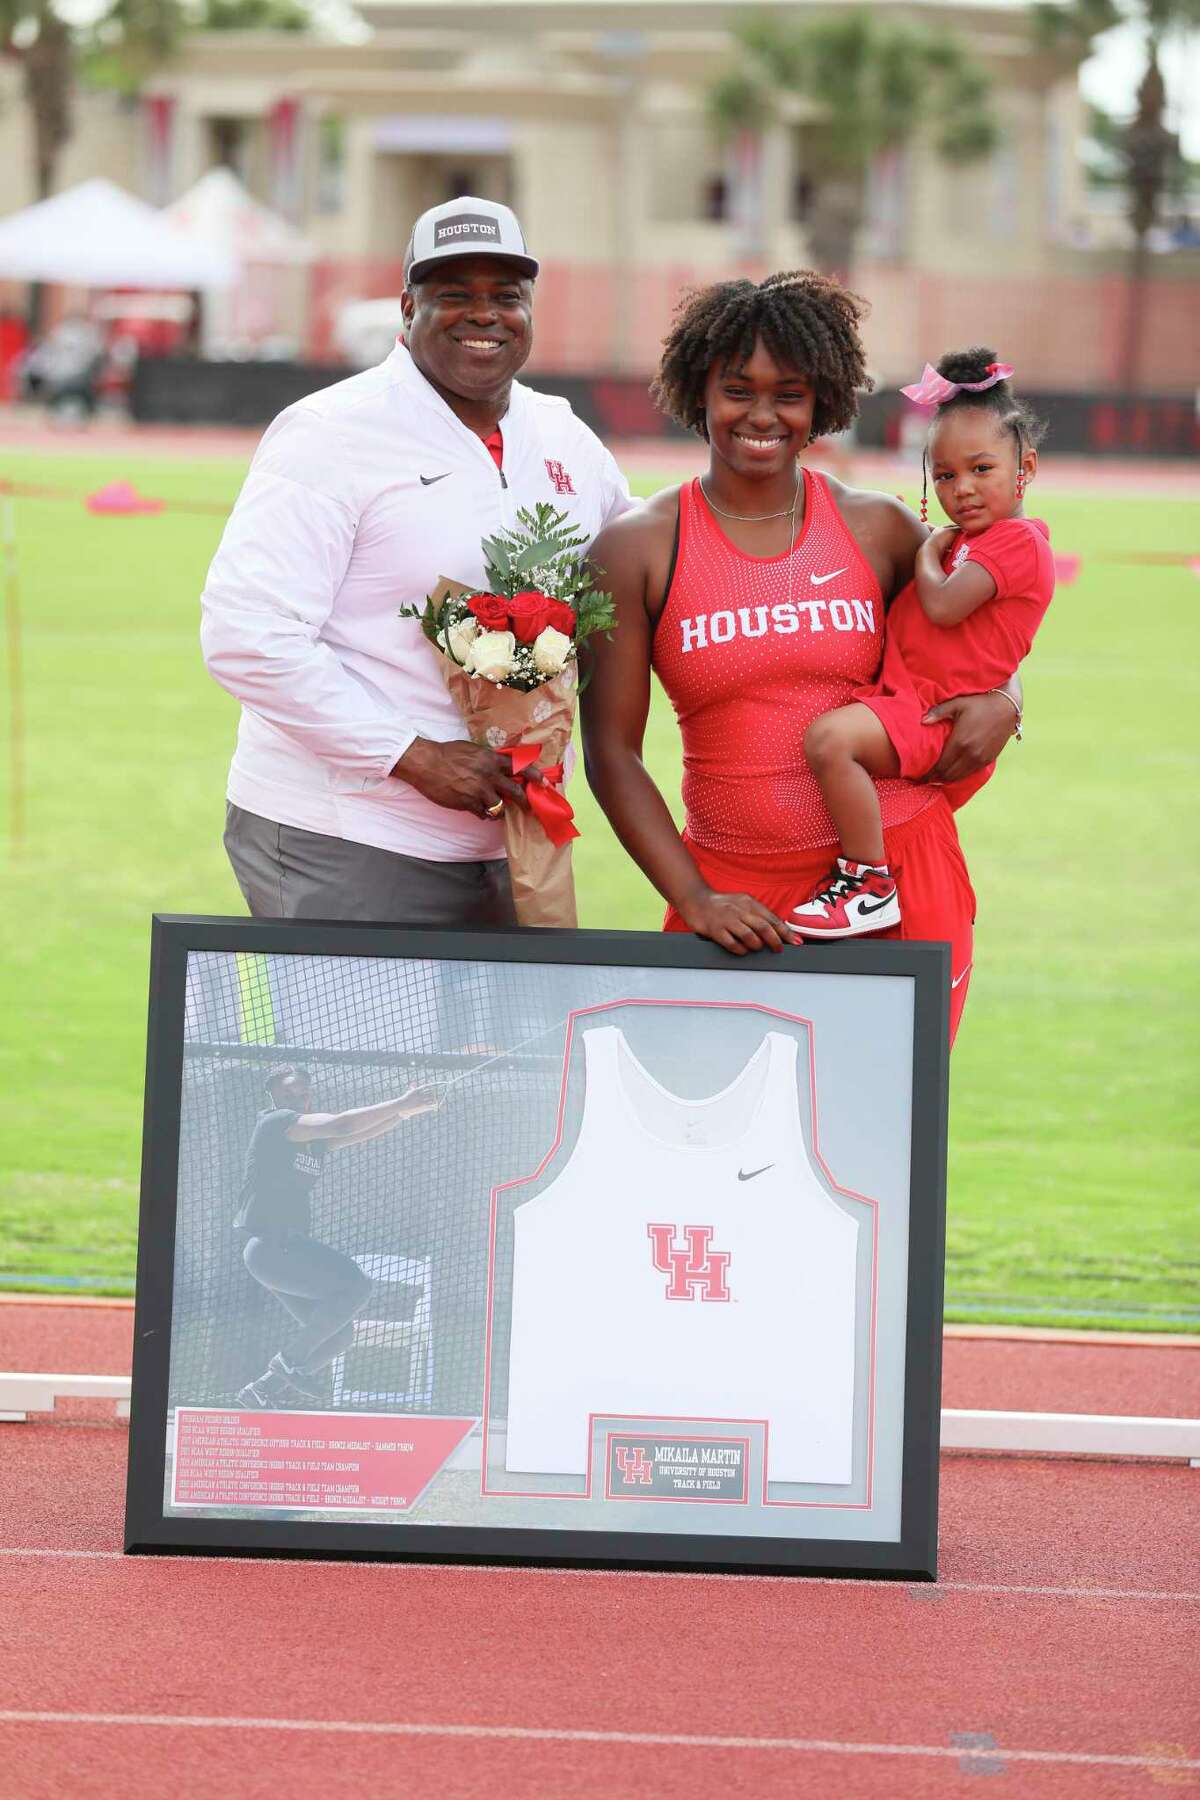 Mikaila Martin has balanced being a mother to Camryn, 3, and being an athlete at UH where she will compete in NCAA hammer throw this week.